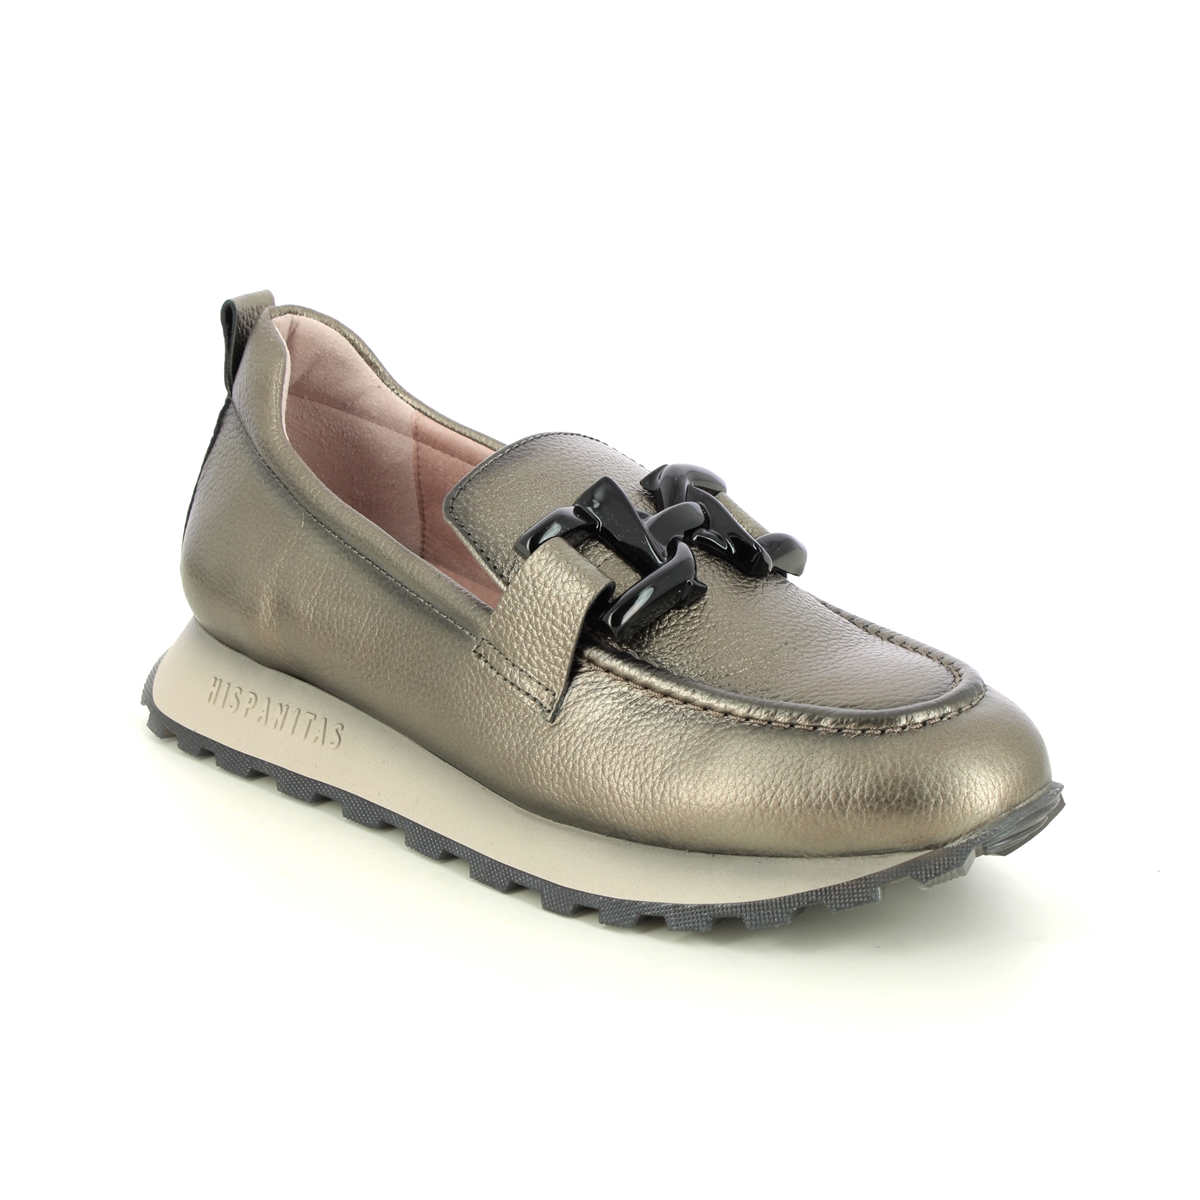 Hispanitas Loira Loafer Pewter Womens loafers HI232962-51 in a Plain Leather in Size 39